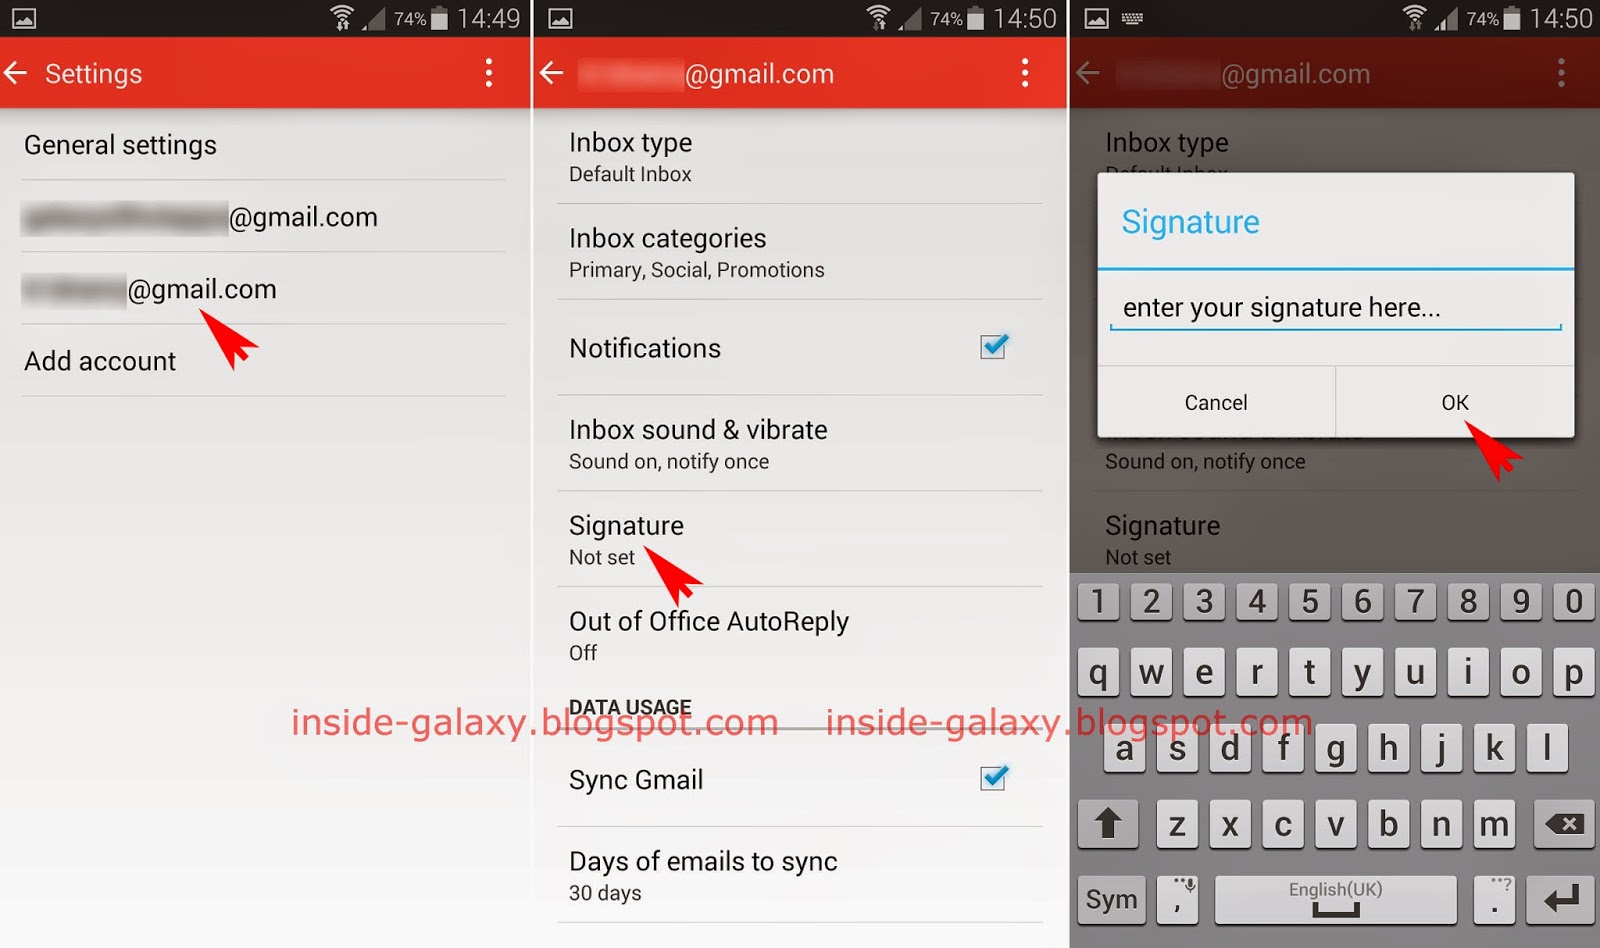 Samsung Galaxy S5: How to Change Signature in Gmail App in 